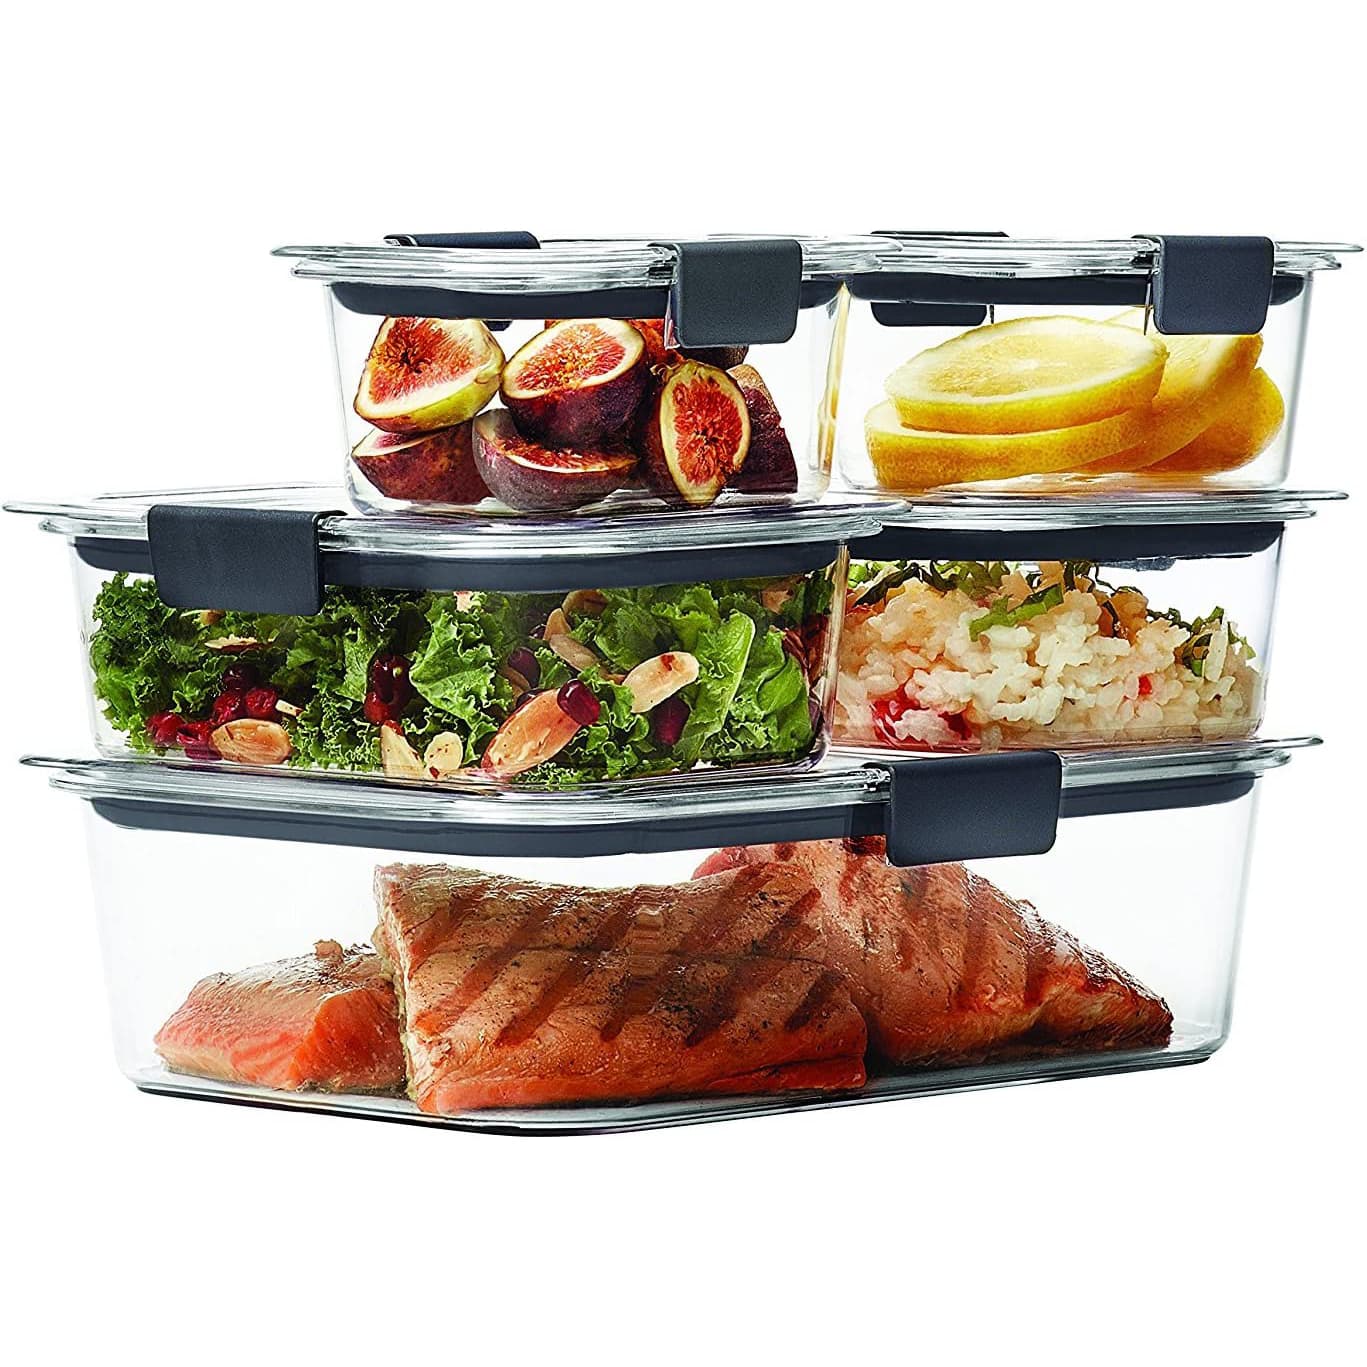 http://cdn.apartmenttherapy.info/image/upload/v1687905804/gen-workflow/product-database/rubbermaid-brilliance-food-container-storage-amazon.jpg